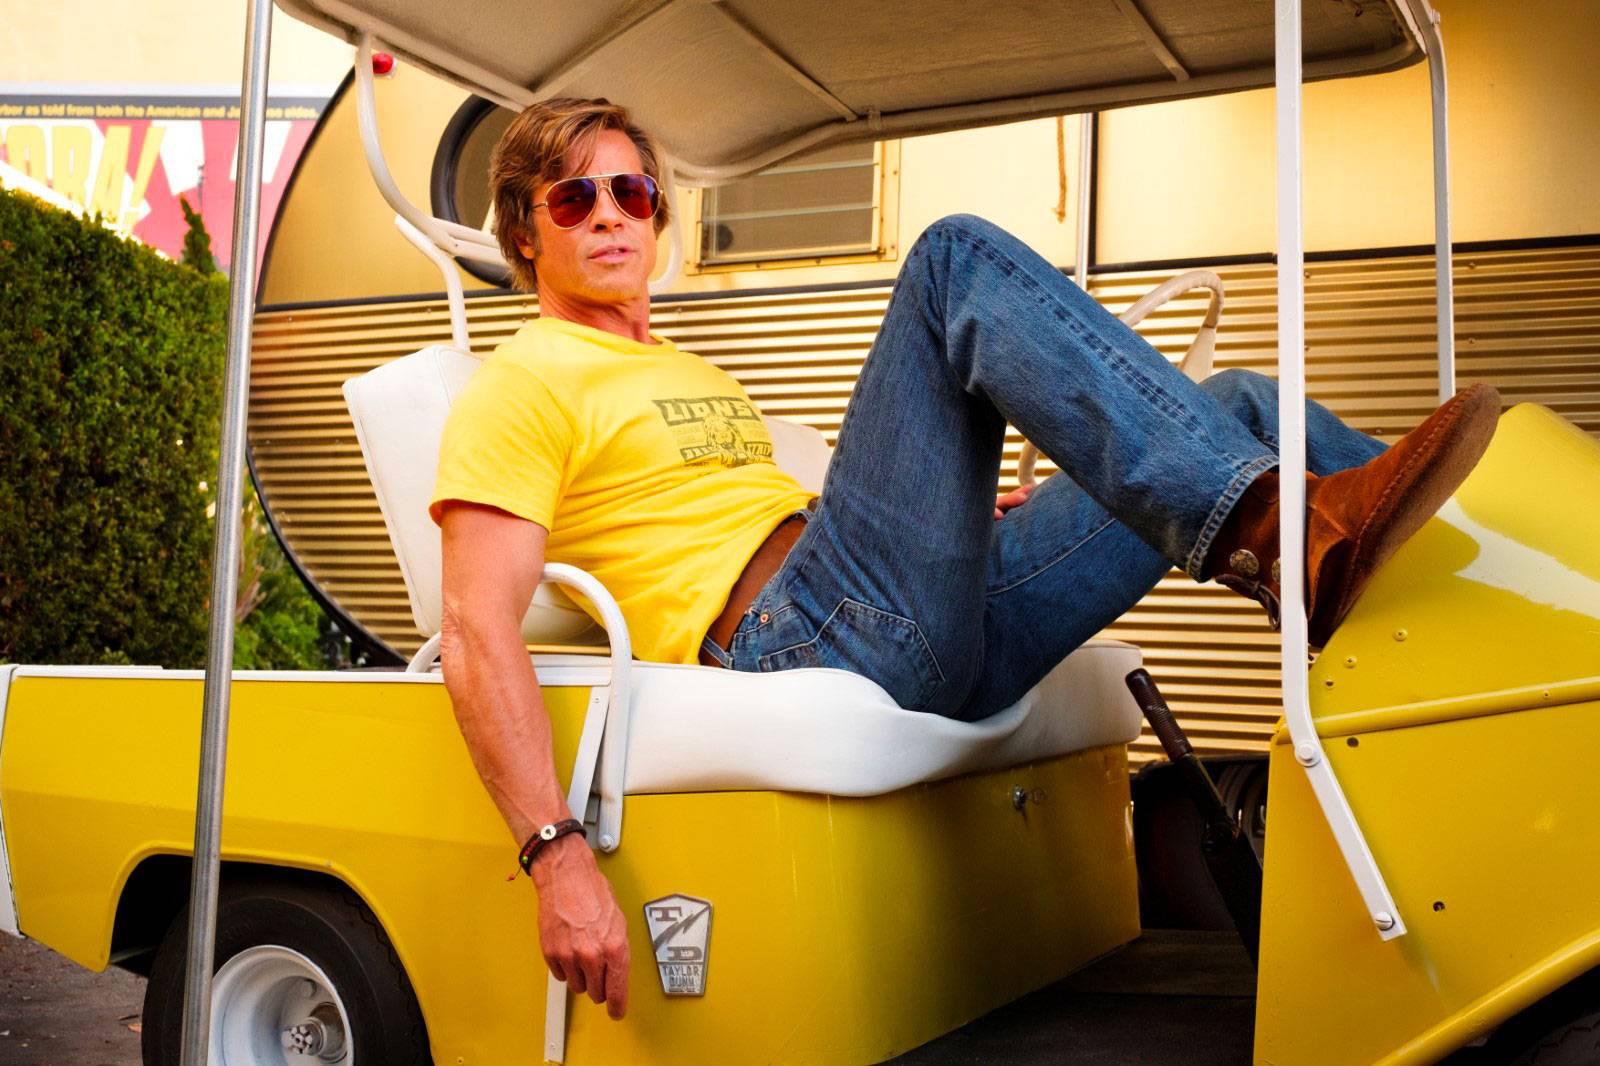 Brad Pitt dans "Once Upon a Time… in Hollywood" (2019) © Sony Pictures Entertainment Deutschland GmbH, 2019